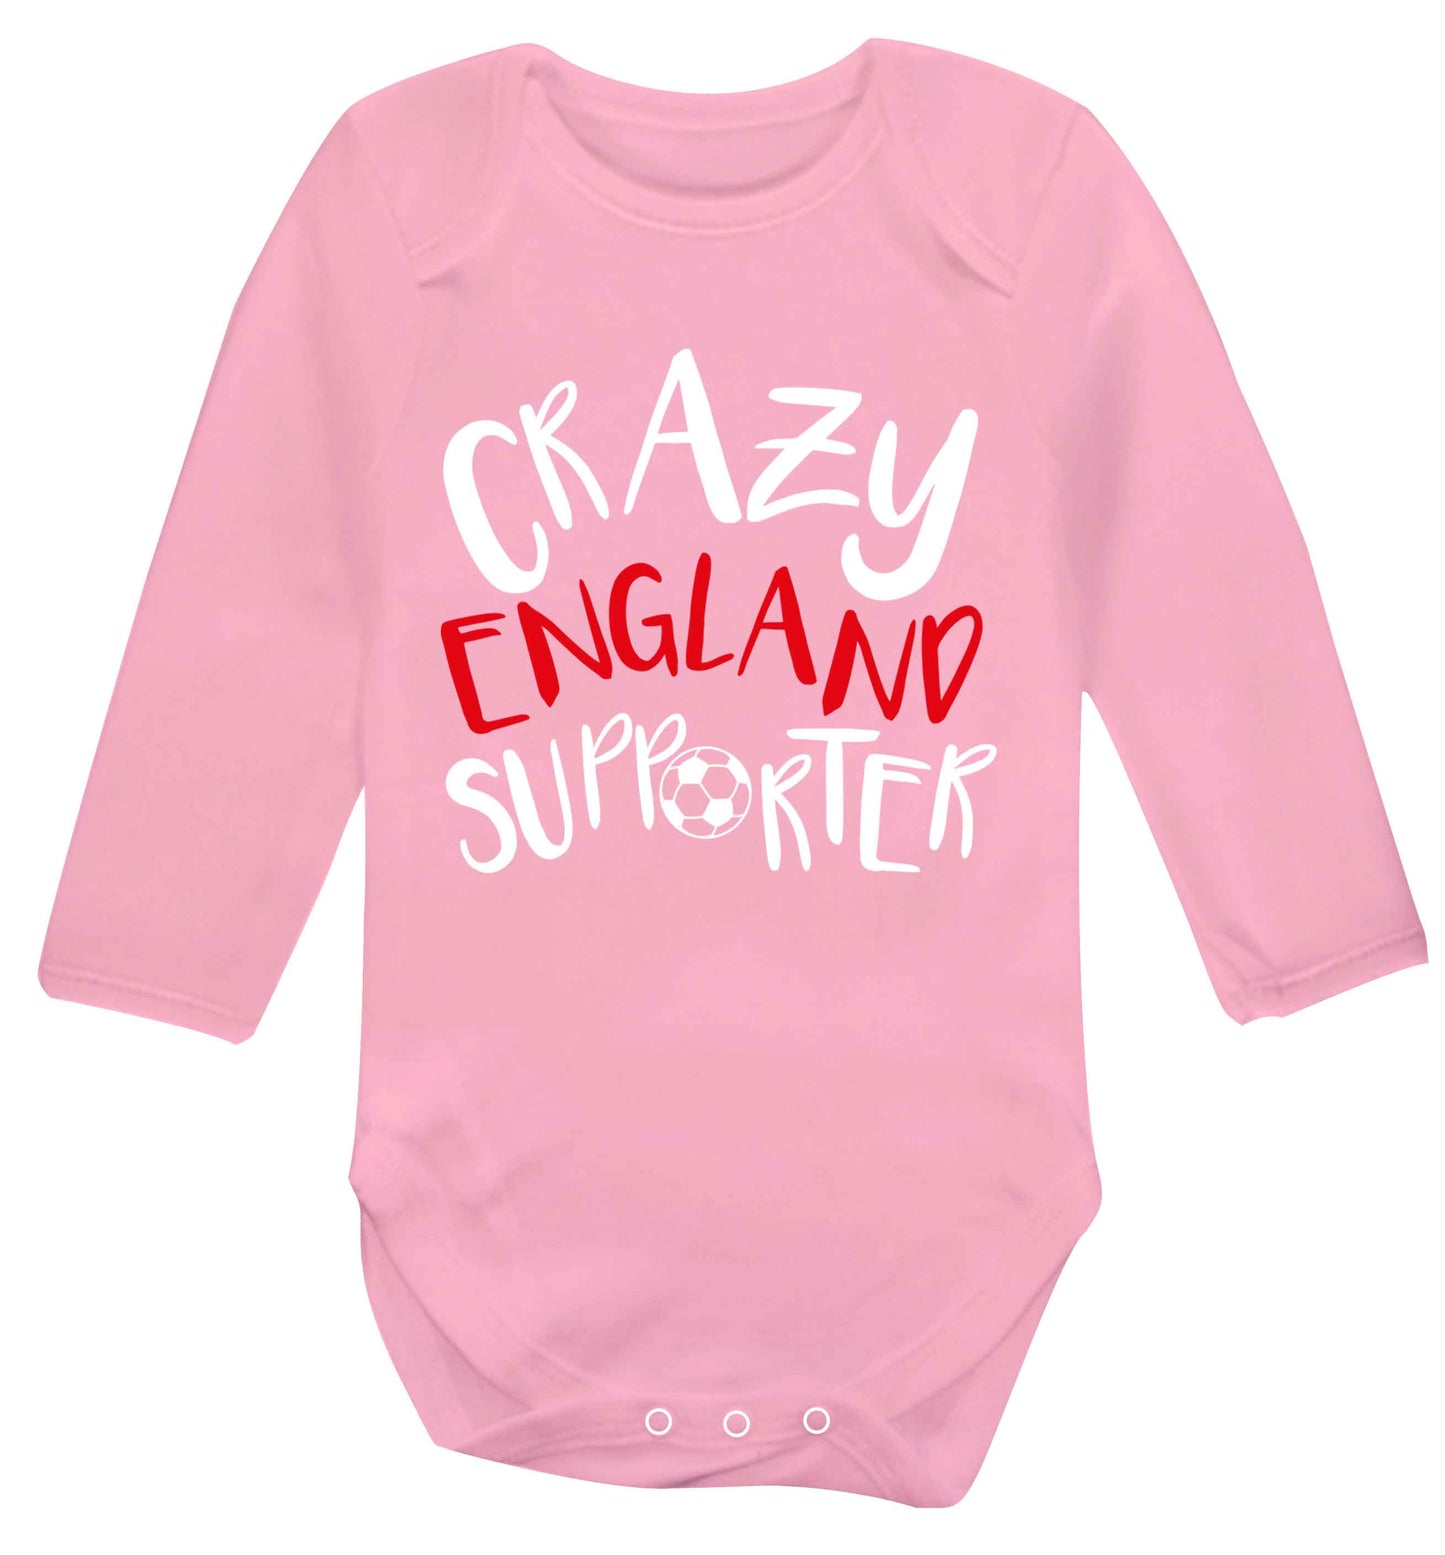 Crazy England supporter Baby Vest long sleeved pale pink 6-12 months